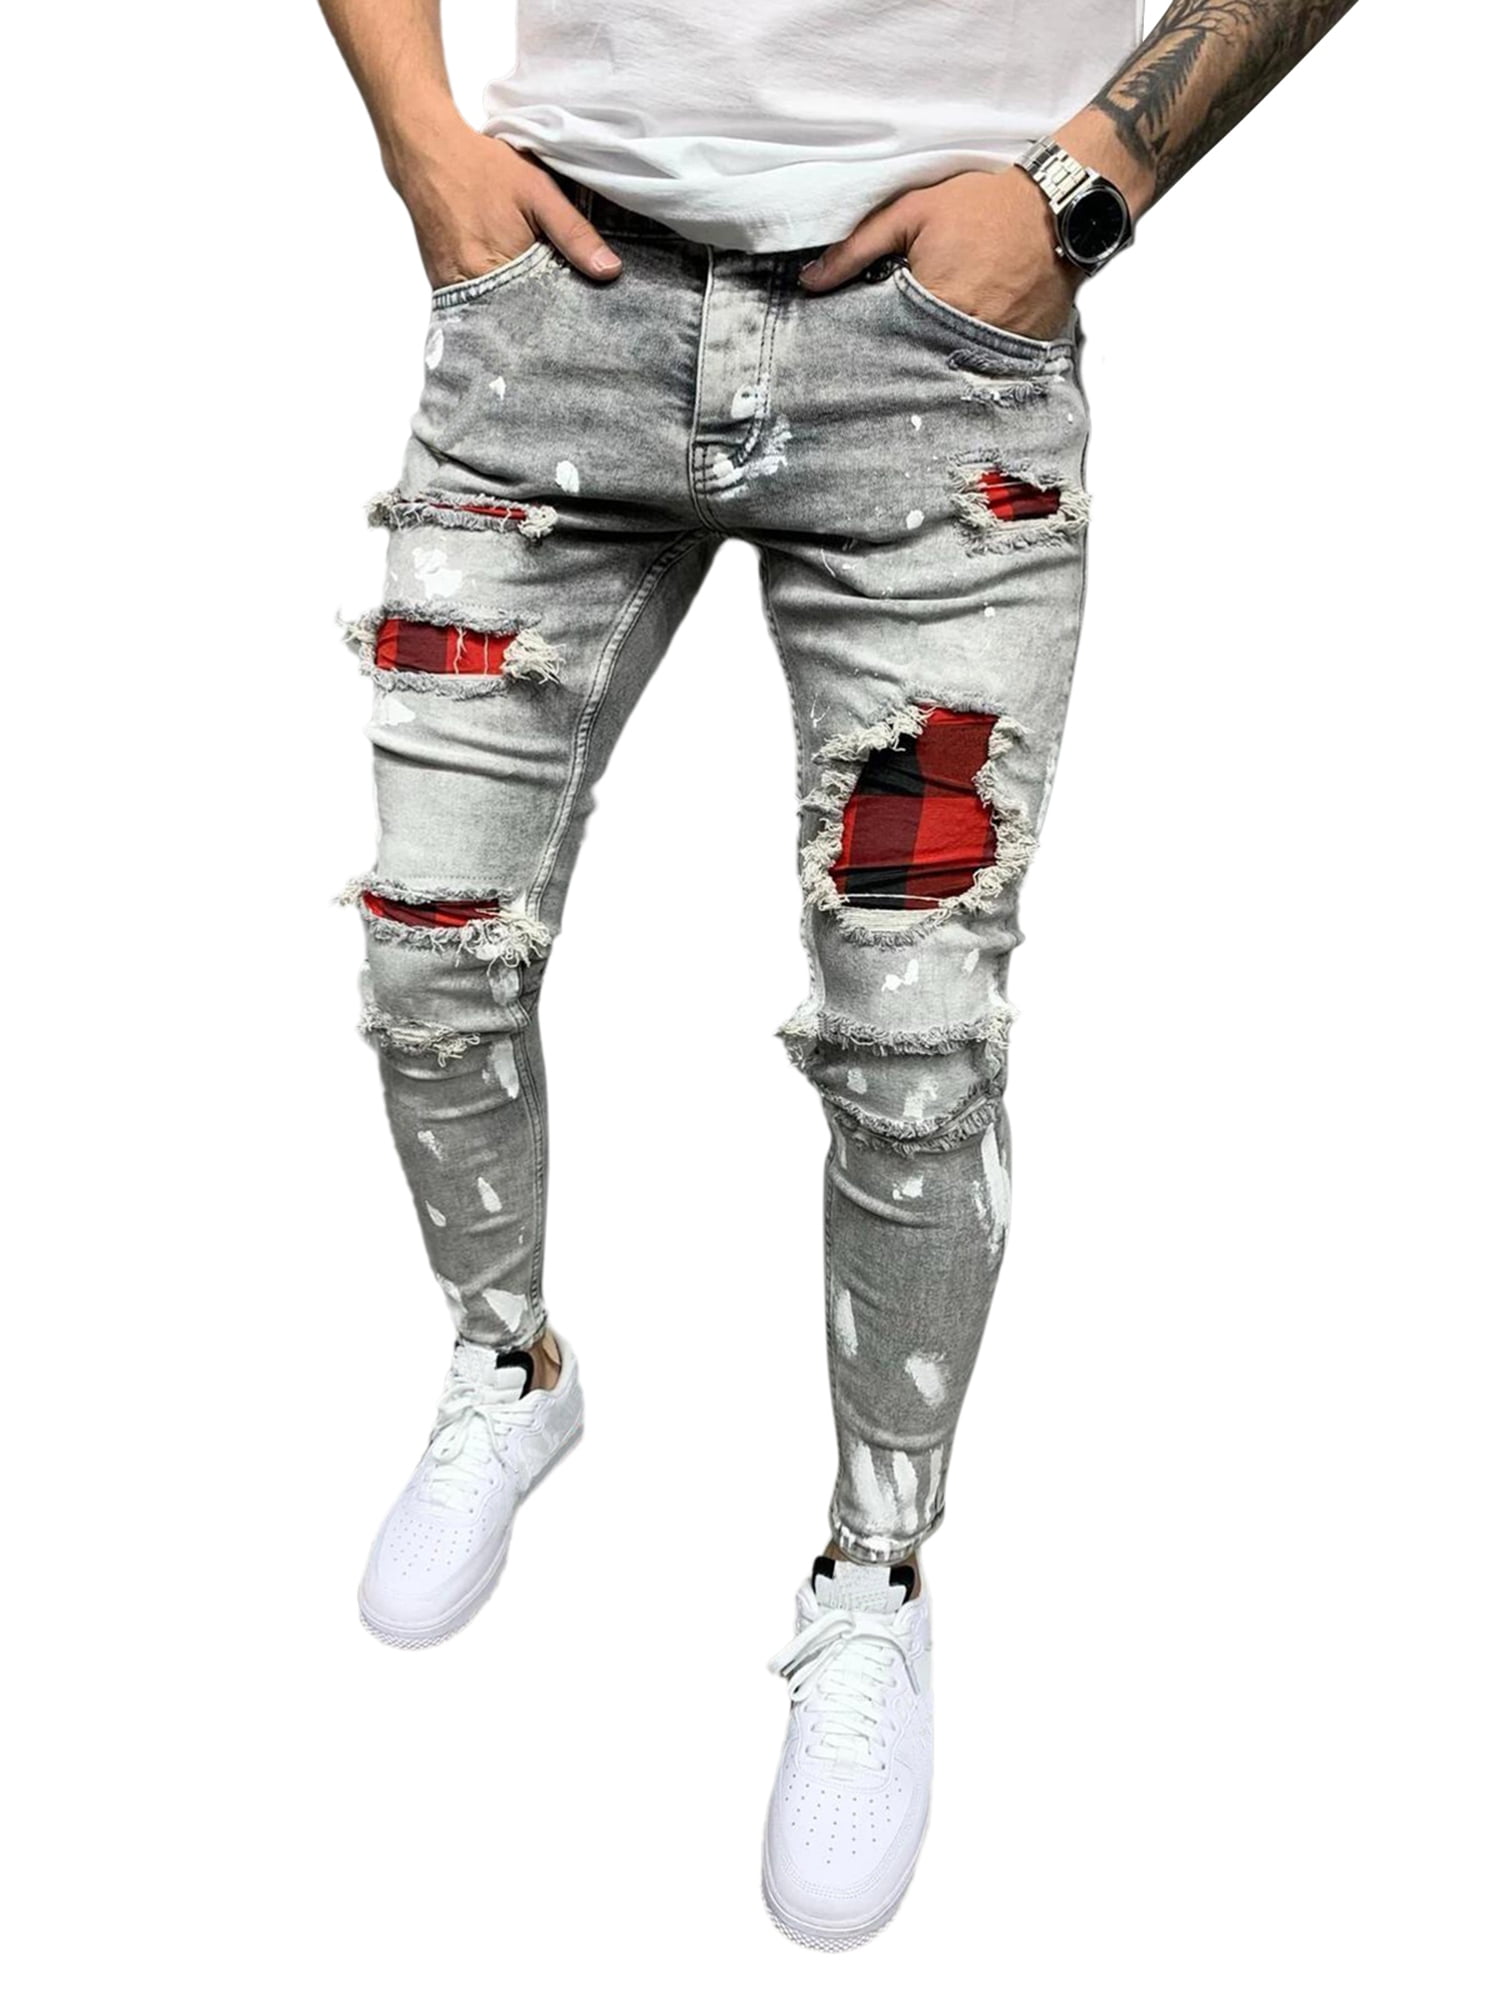 Sportsmand Gæsterne niece Men's Slim Ripped Patch Jeans Tapered Denim Pants Trousers Red Check Plaid  Pants Long Skinny Pencil Pants - Walmart.com